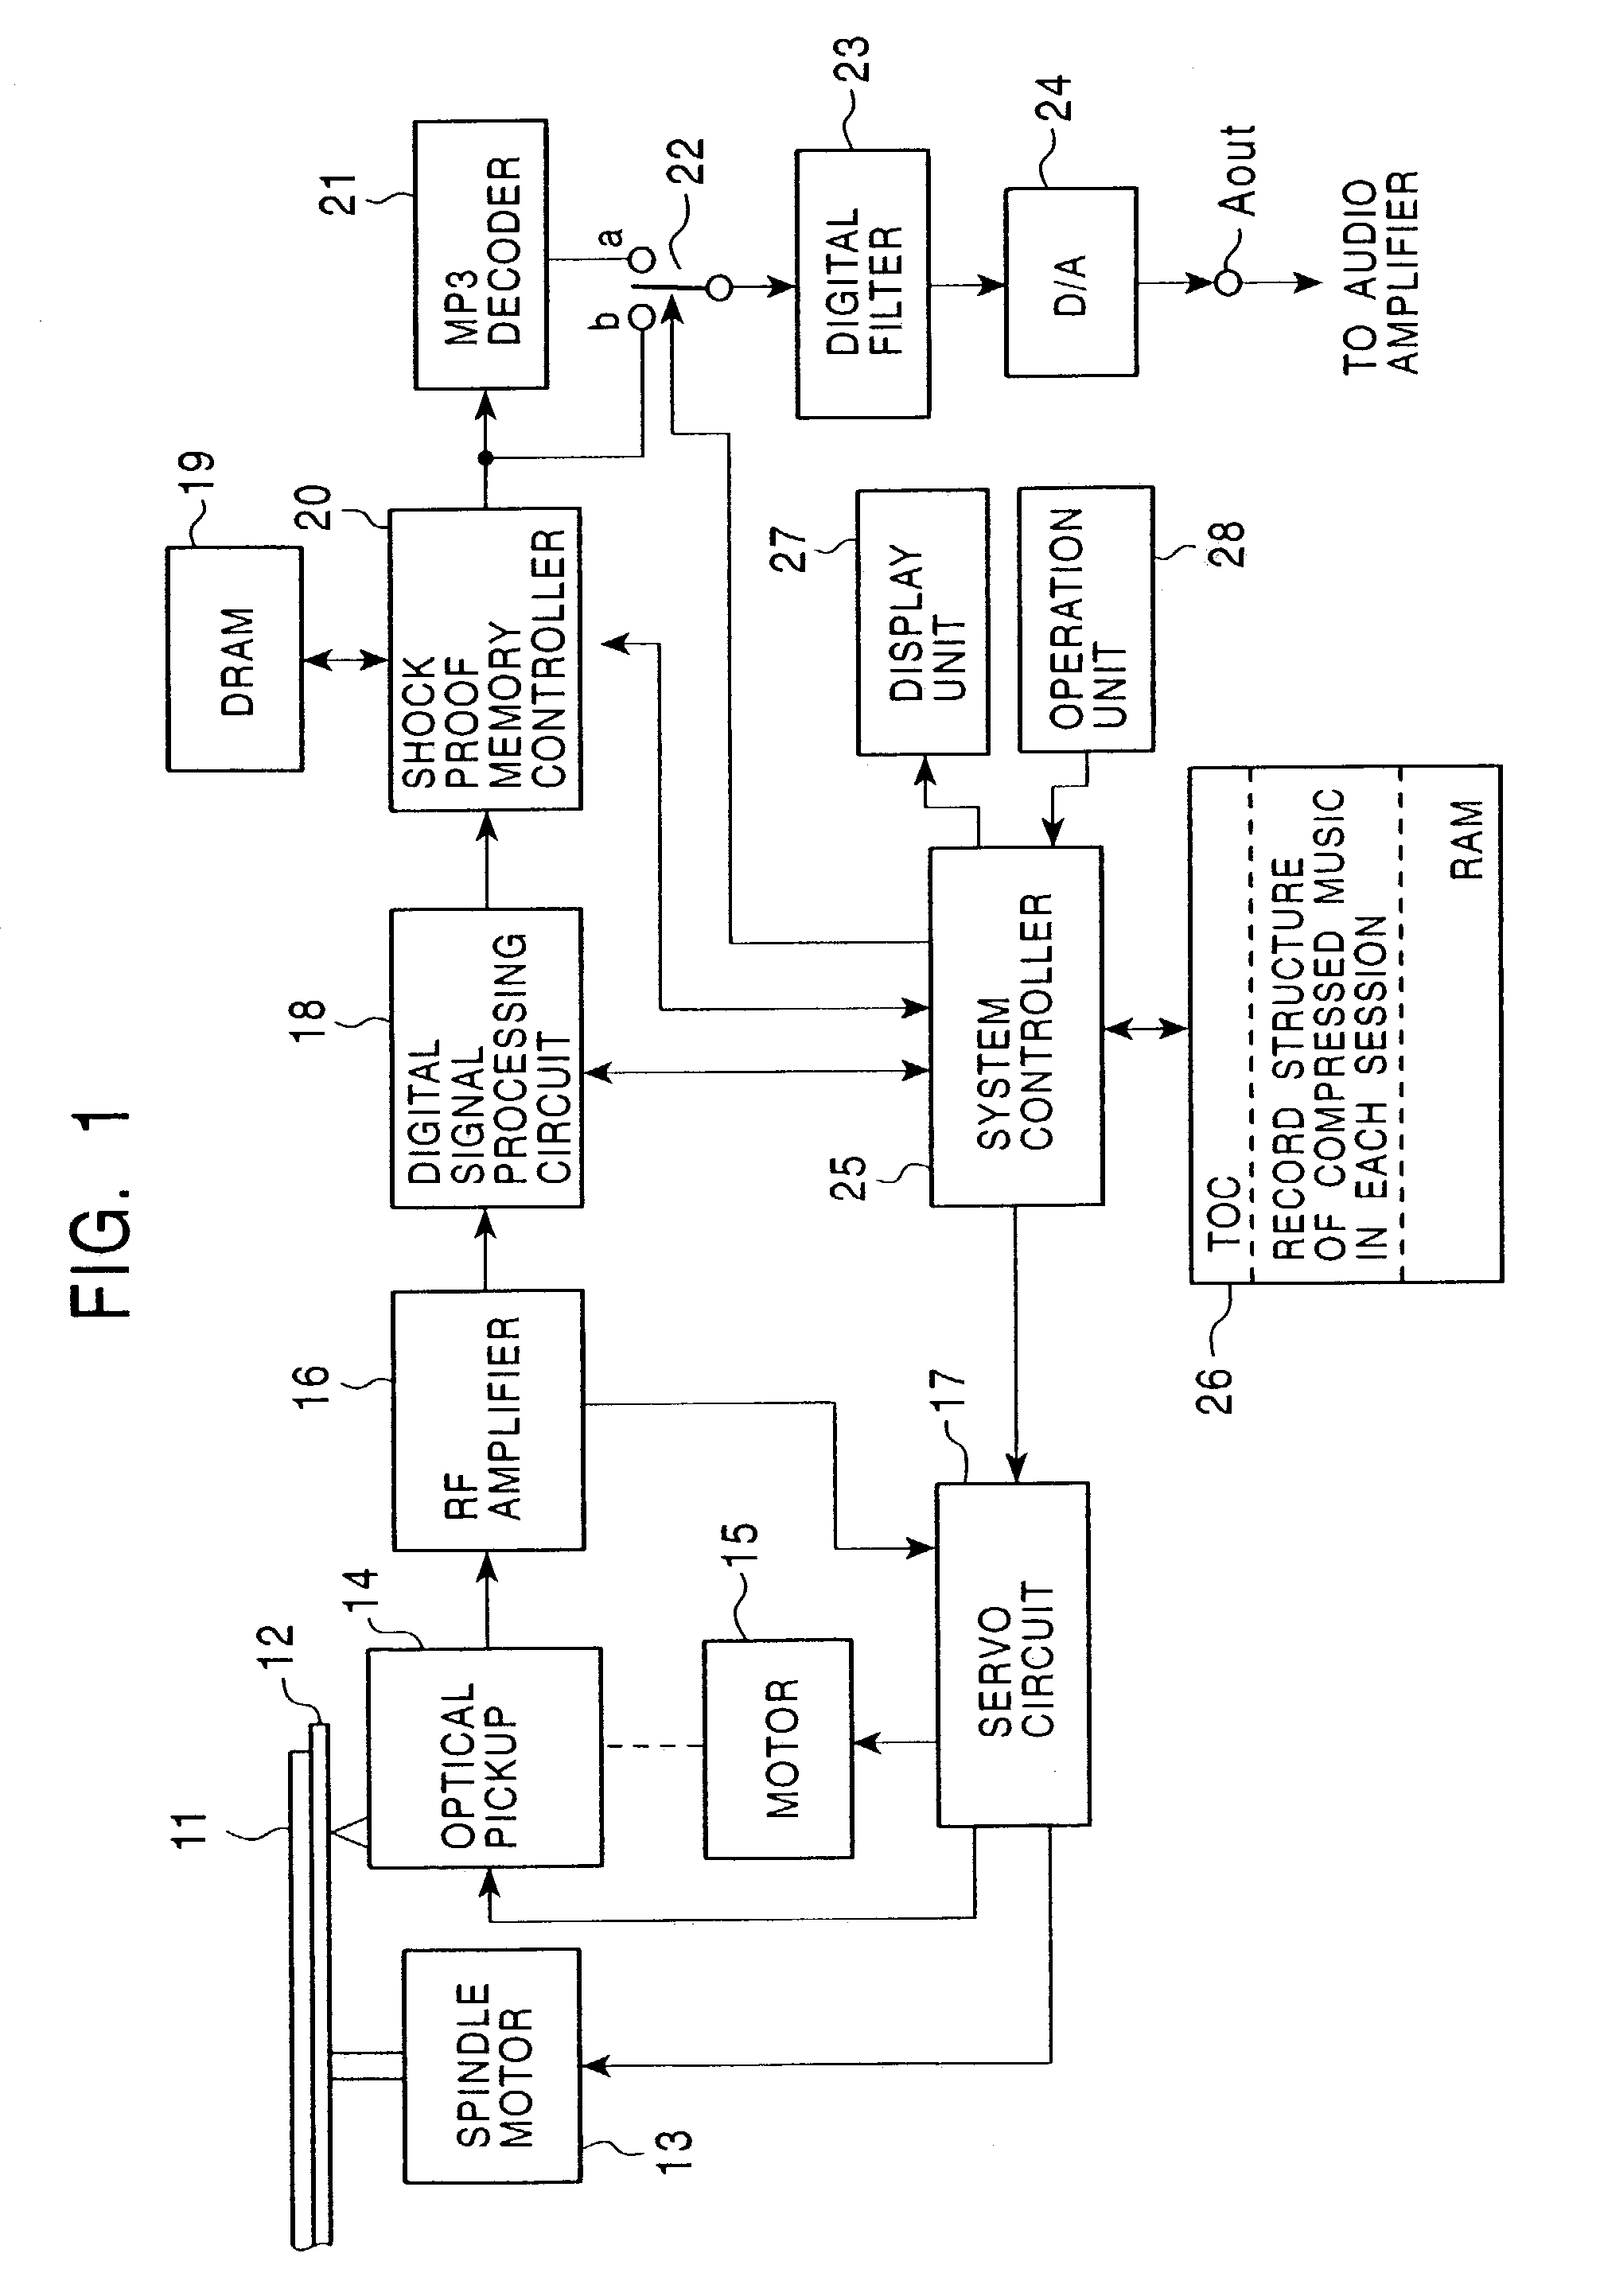 Method and apparatus for playing back a multisession disc